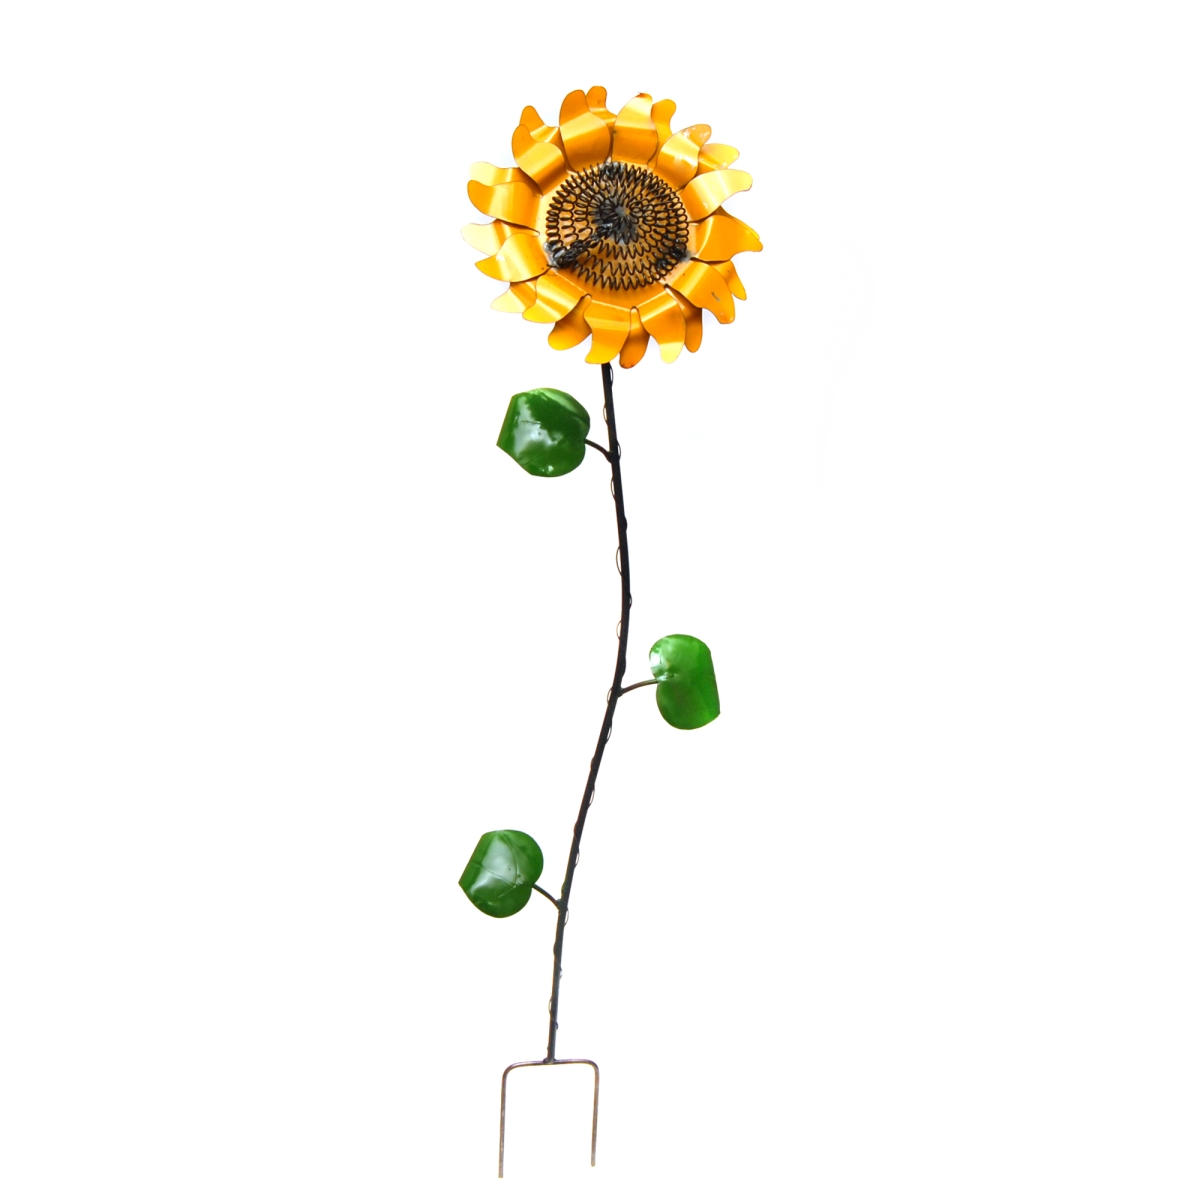 10206 Sunflower Stake For Decor - Small